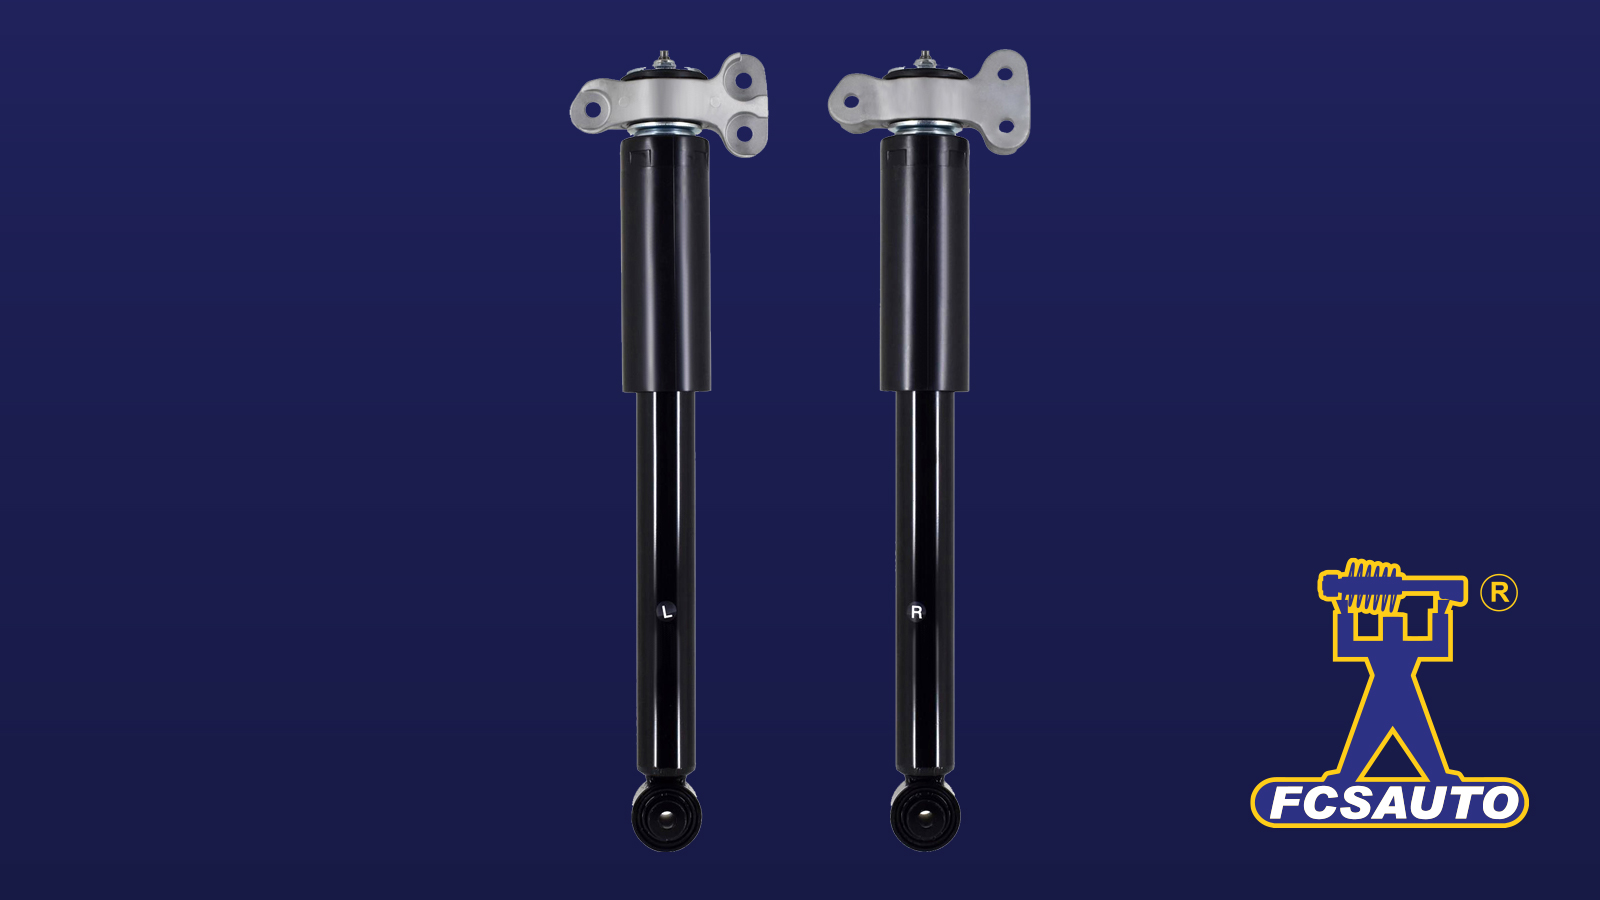 New Shock Absorber Assembly Kits Sold In Pairs … Here’s Why: